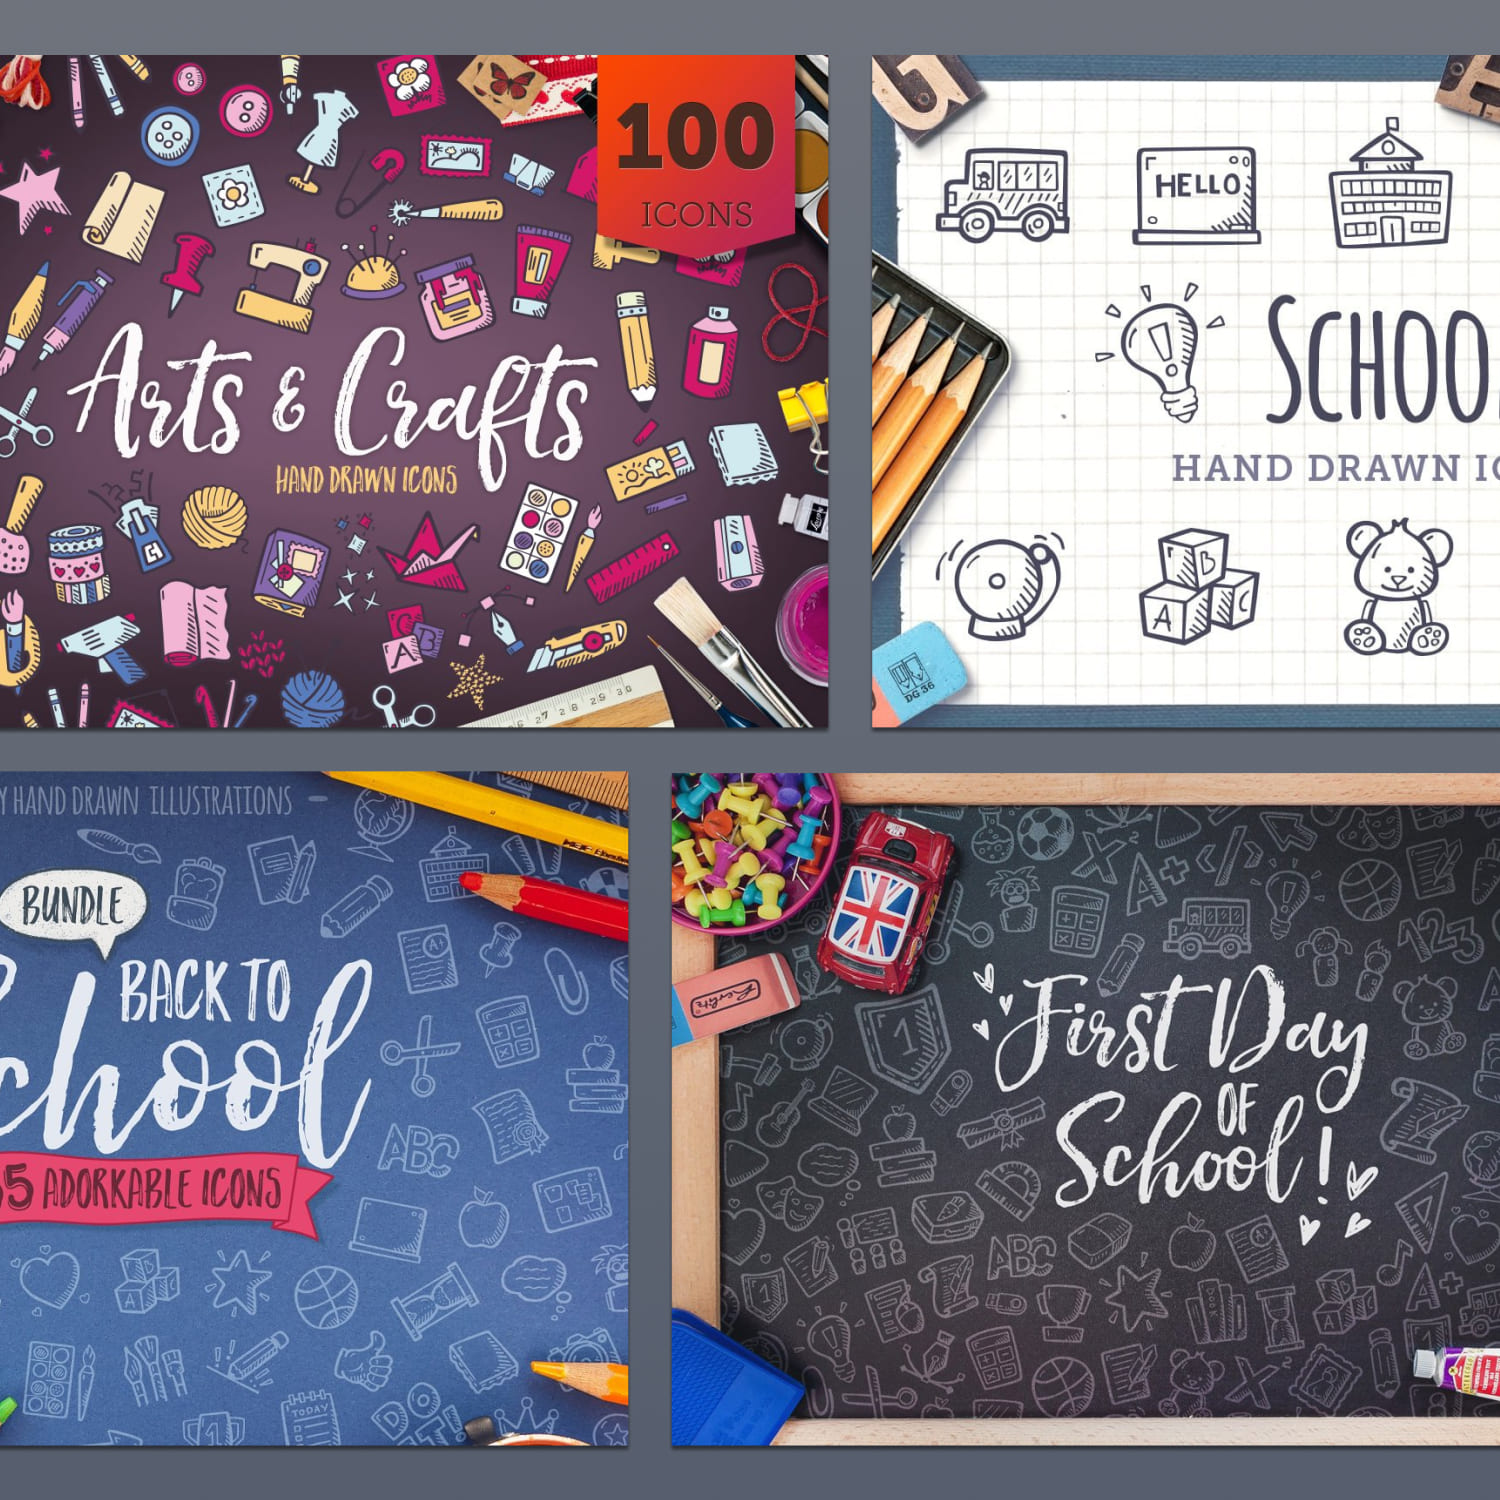 Back To School - Hand Drawn Icons created by Good Stuff No Nonsense.